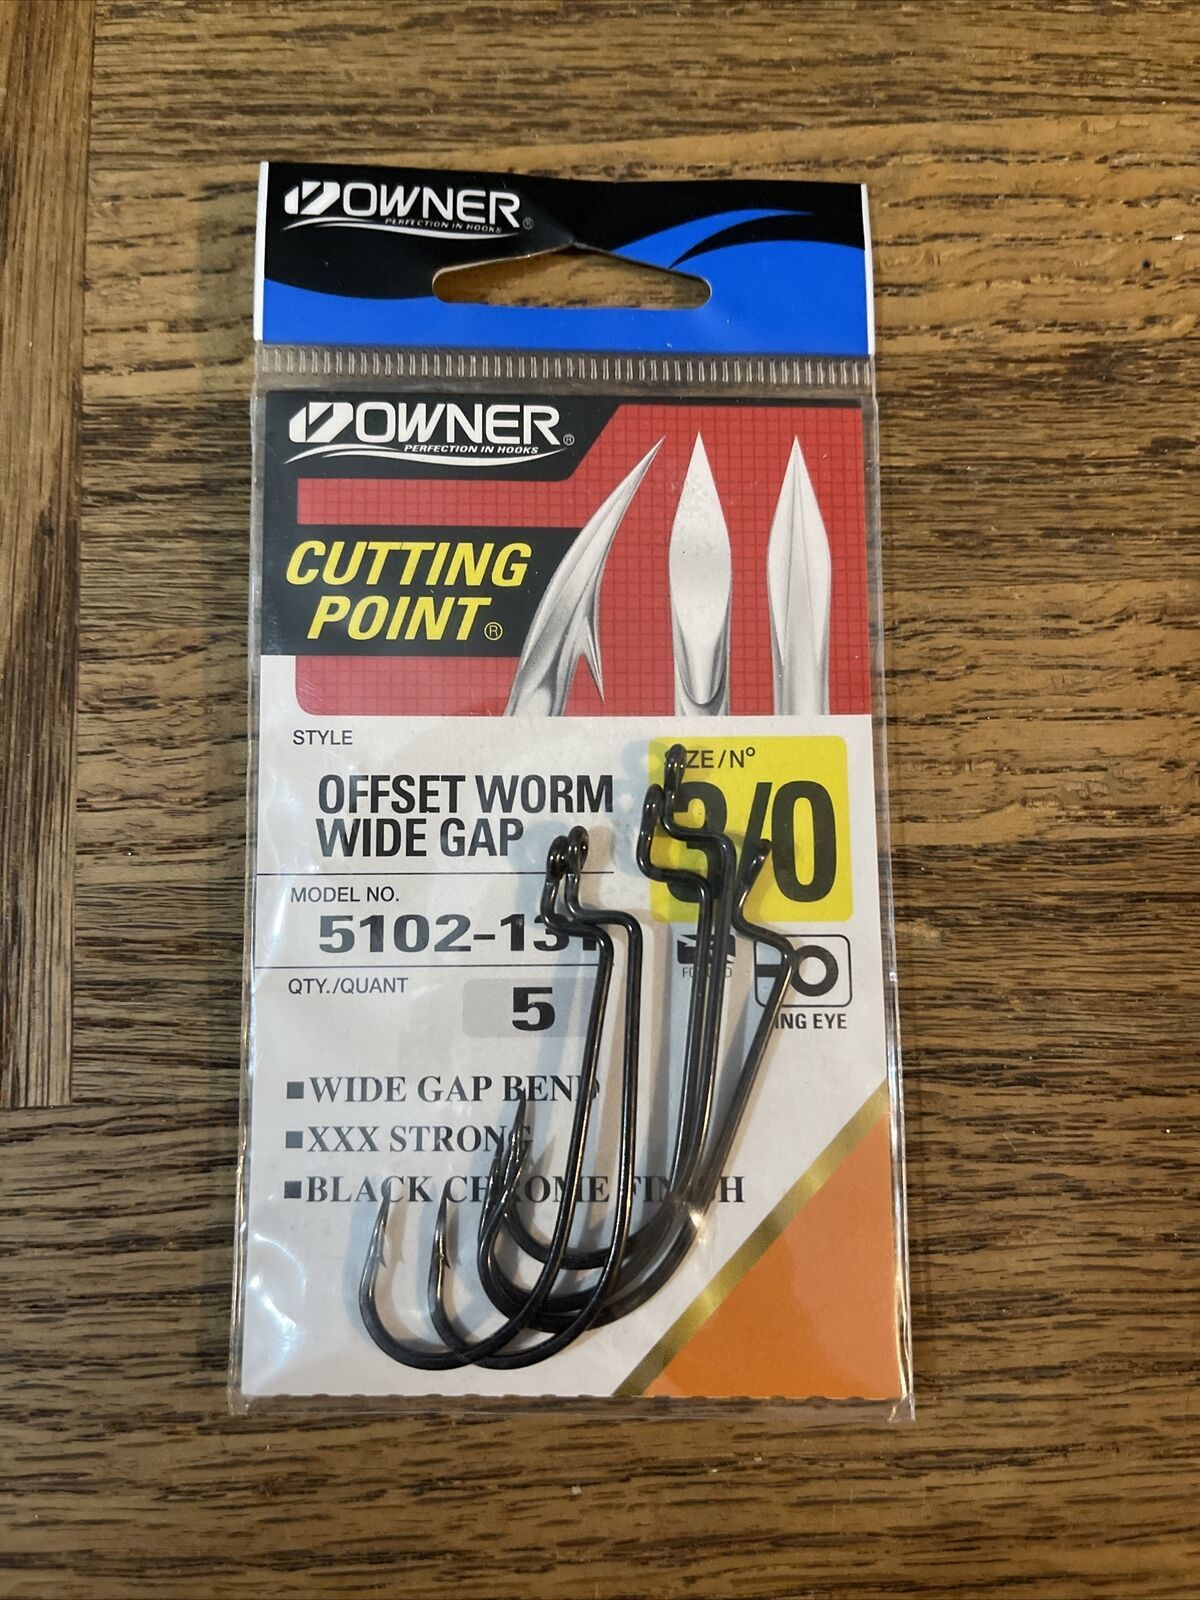 Owner cutting point offset work wide gap hook size 3/0